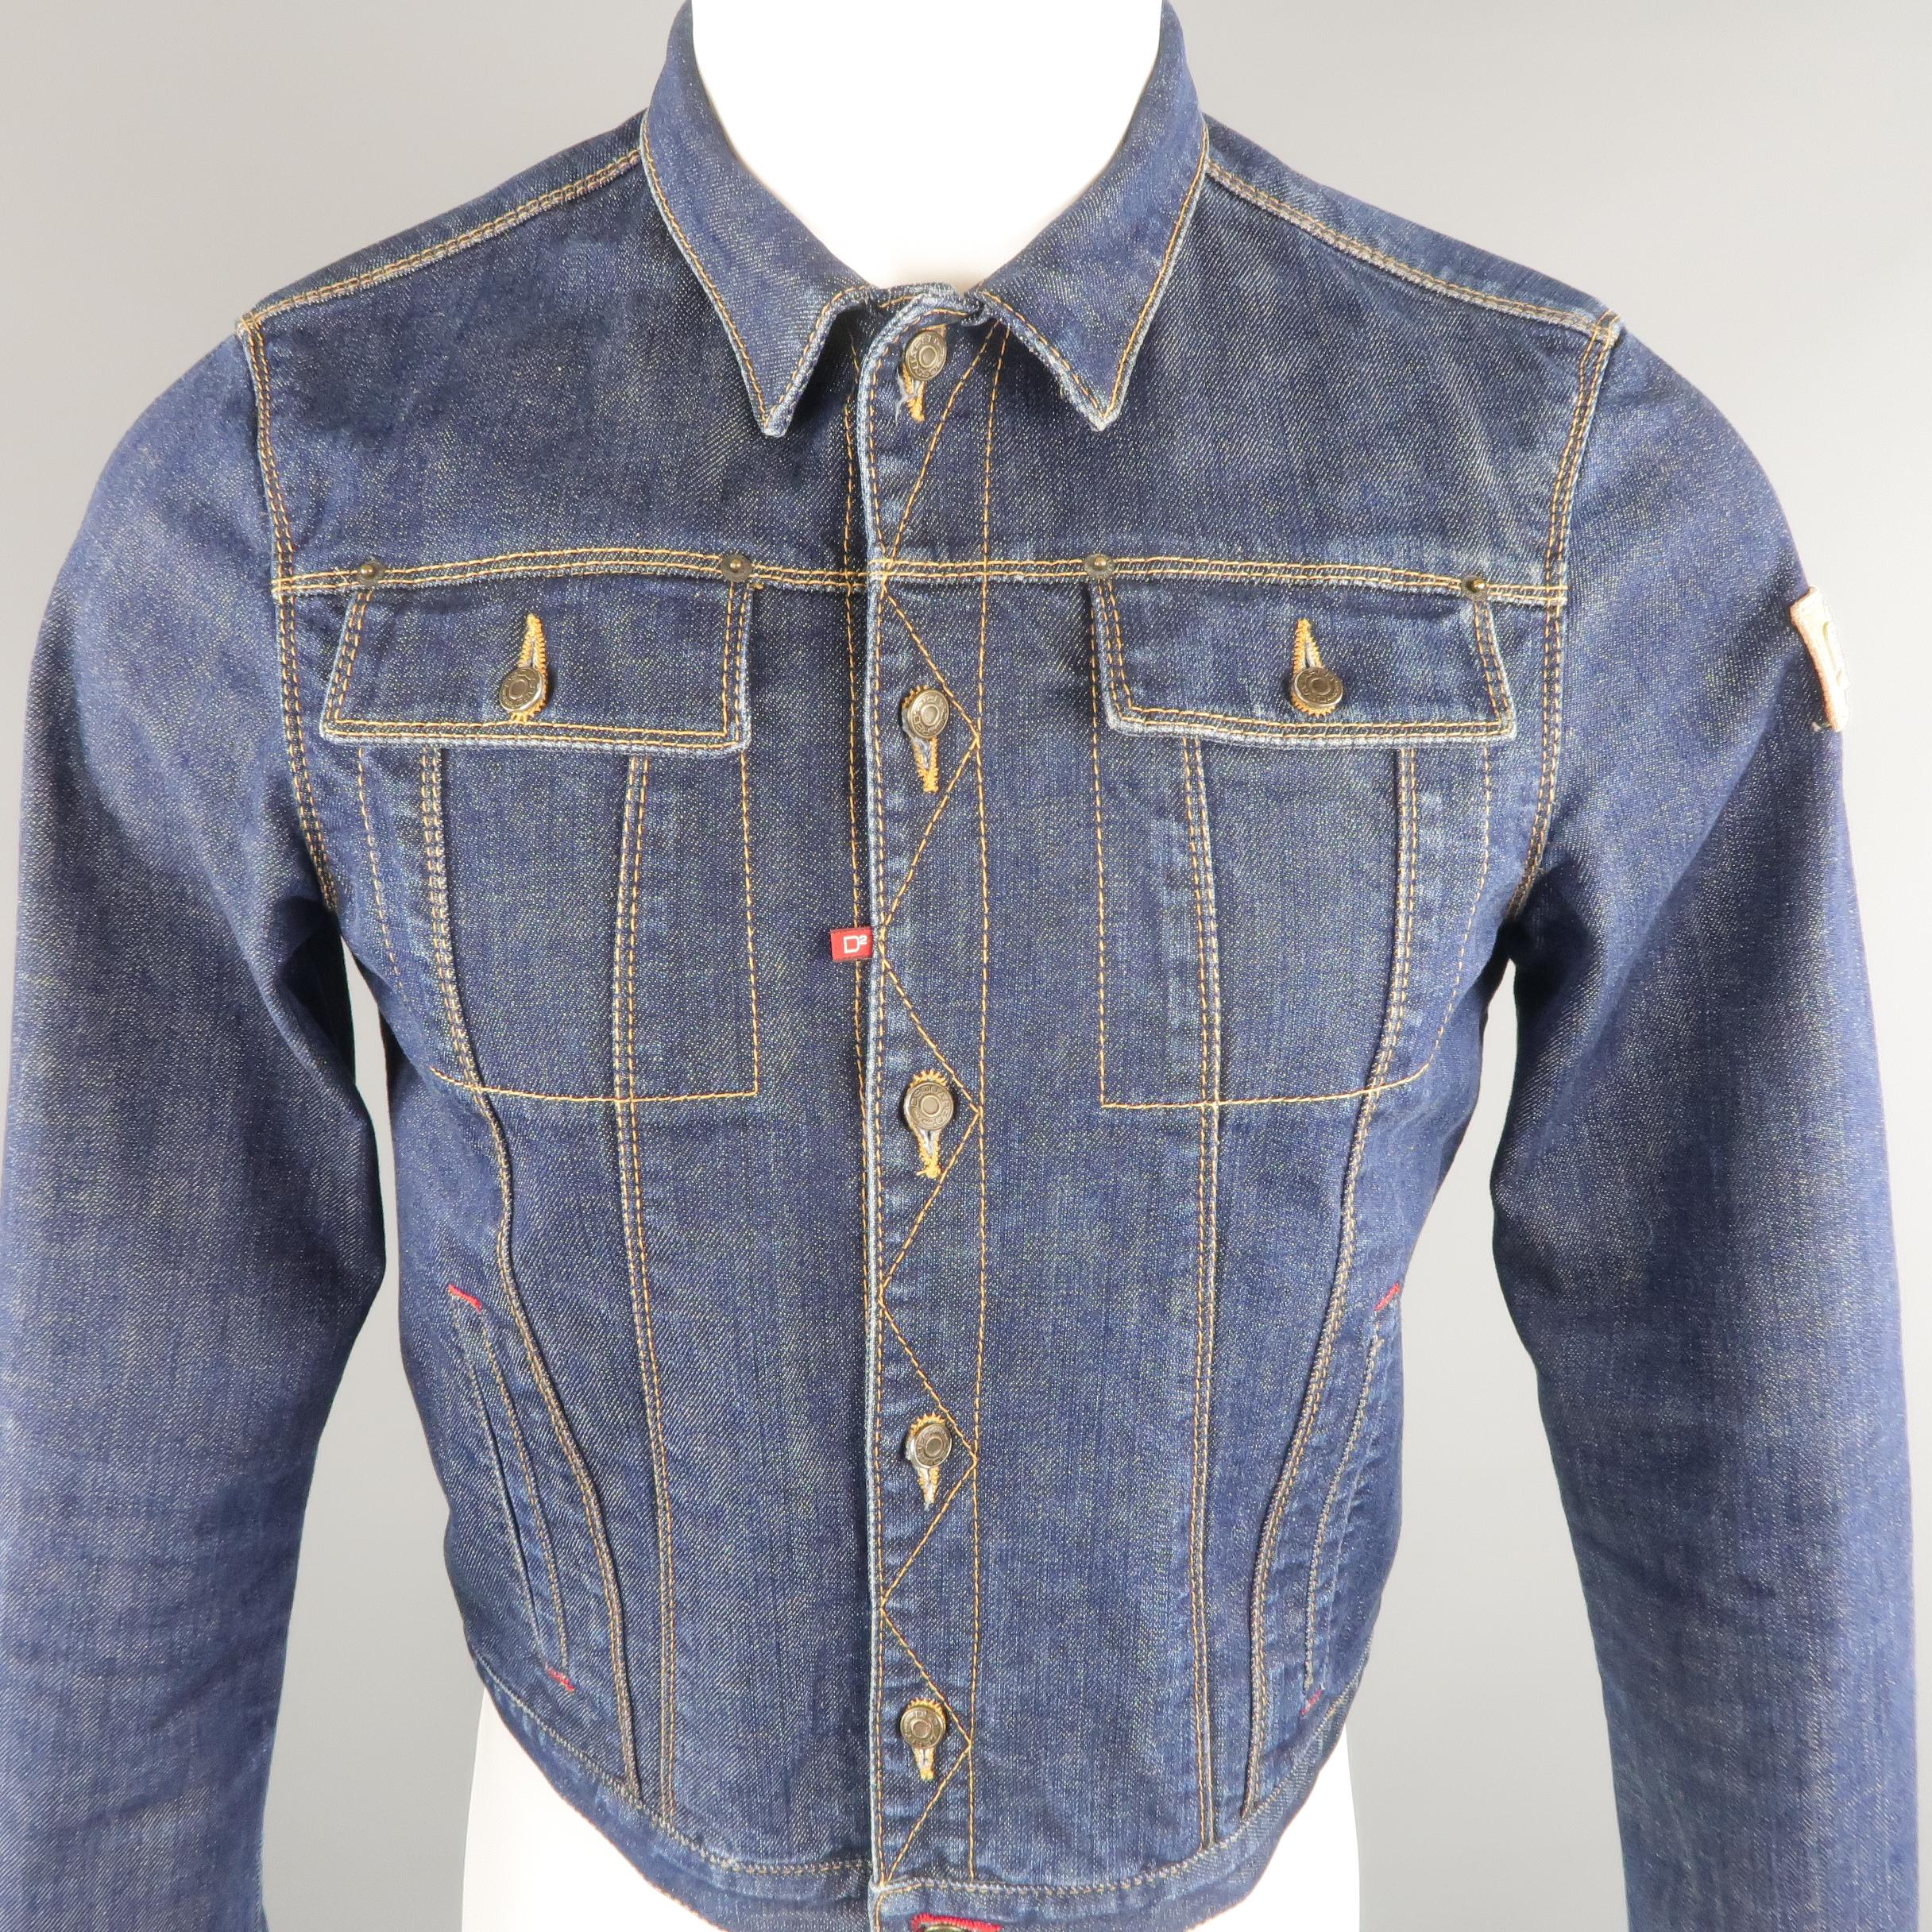 DSQUARED2 cropped jacket come in indigo denim, contrast stitches, patch flap pockets and lateral patch label. Made in Italy.
 
Excellent Pre-Owned Condition.
Marked: 48 IT
 
Measurements:
 
Shoulder: 15.5 in.
Chest: 38 in.
Sleeve: 27.5 in.
Length: